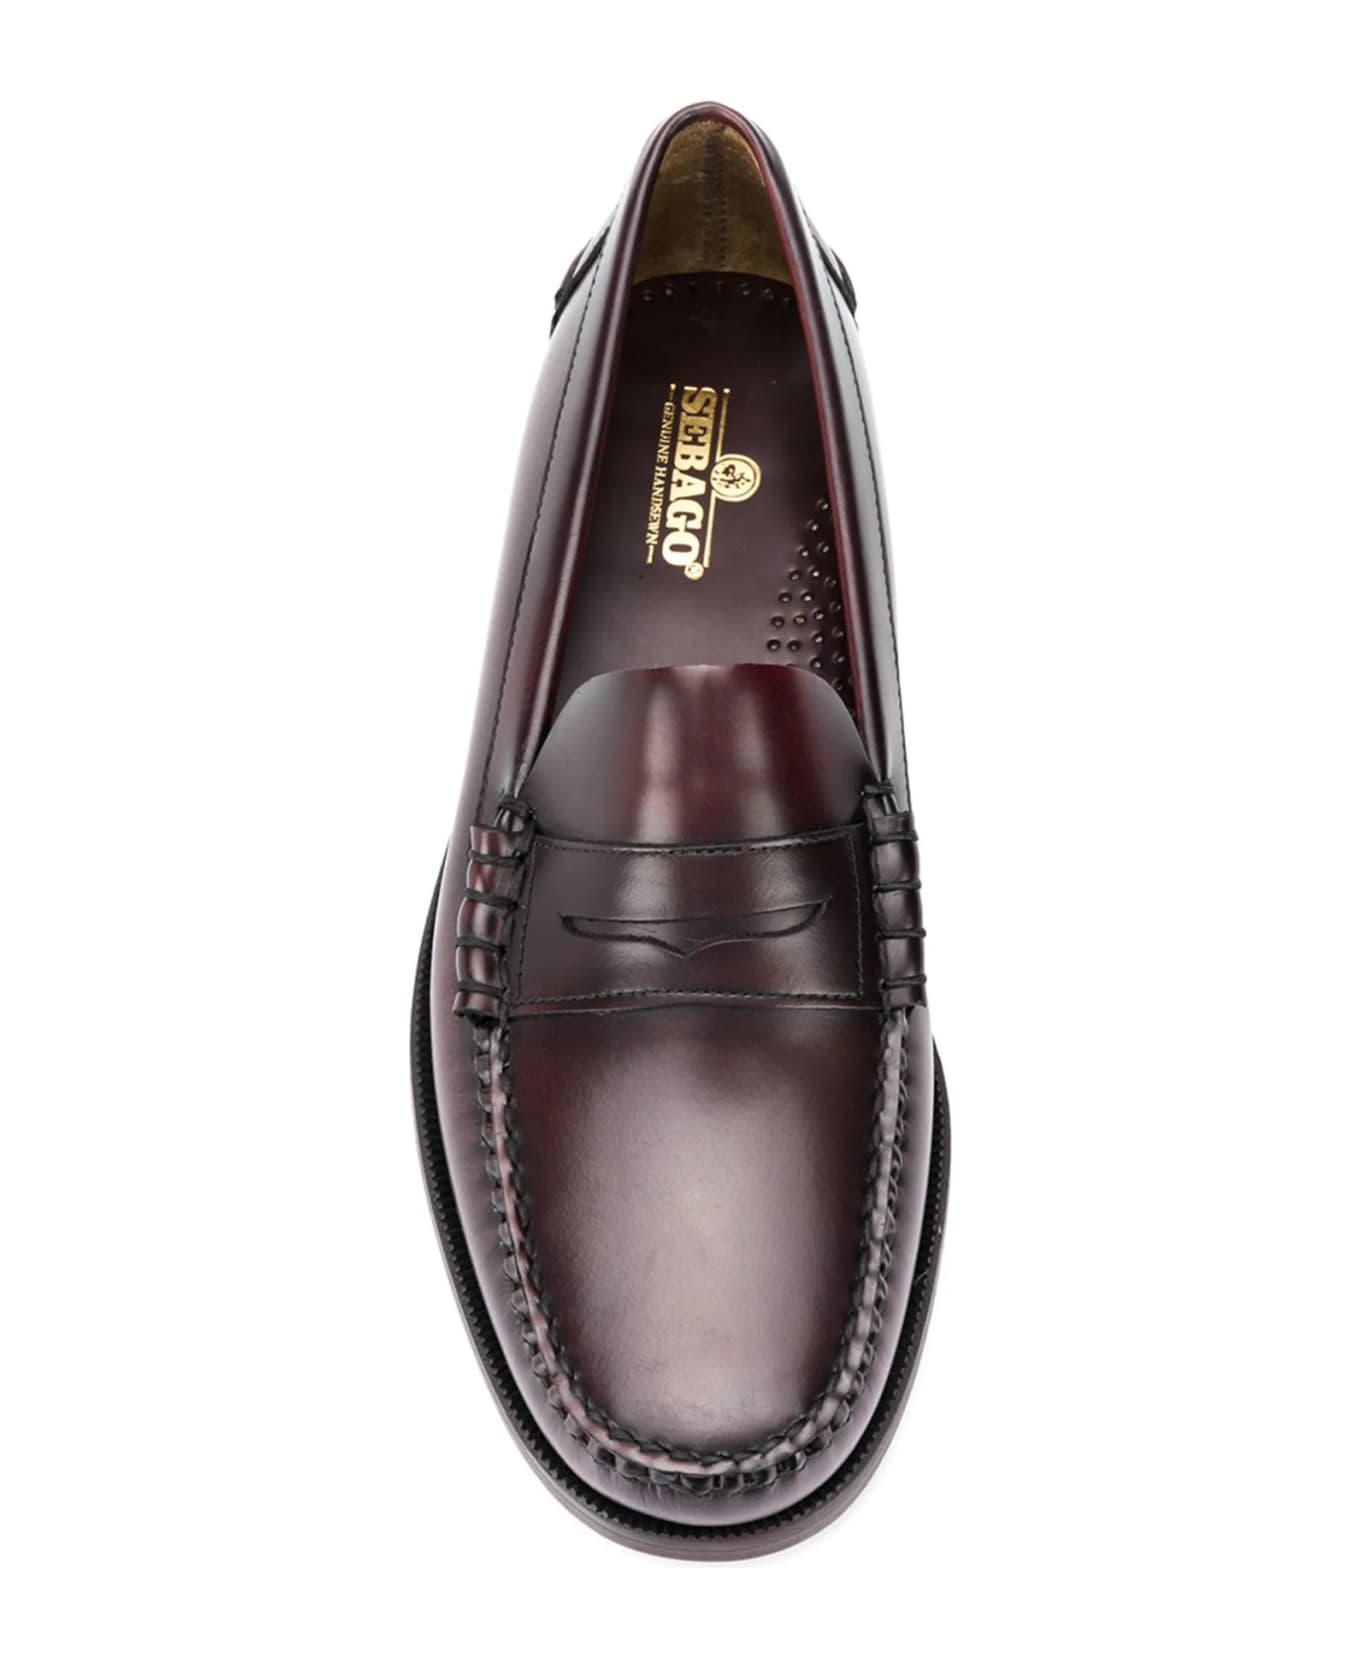 Sebago Brown Leather Loafers - Brown